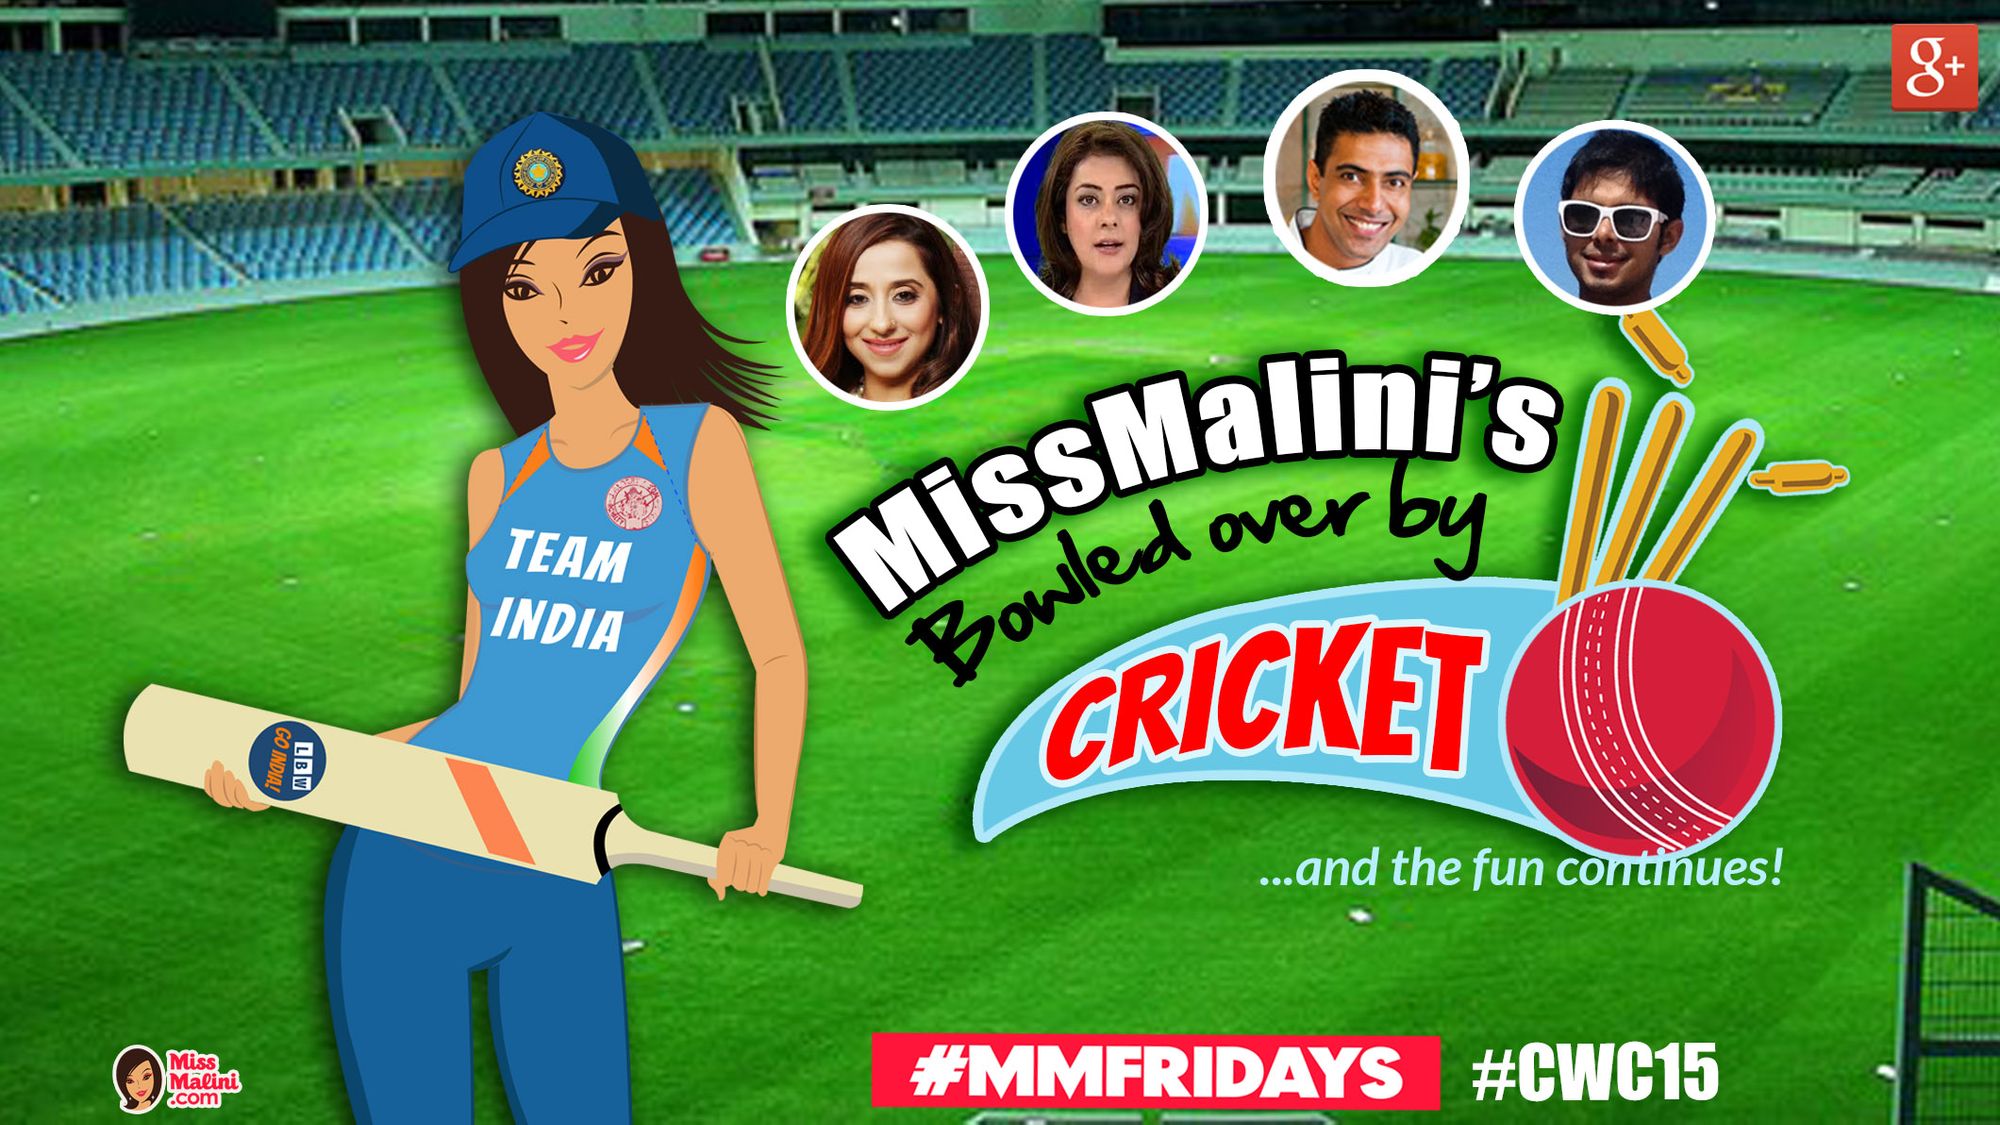 WATCH LIVE: MissMalini’s Bowled Over By Cricket Hangout: The IPL Madness Continues!